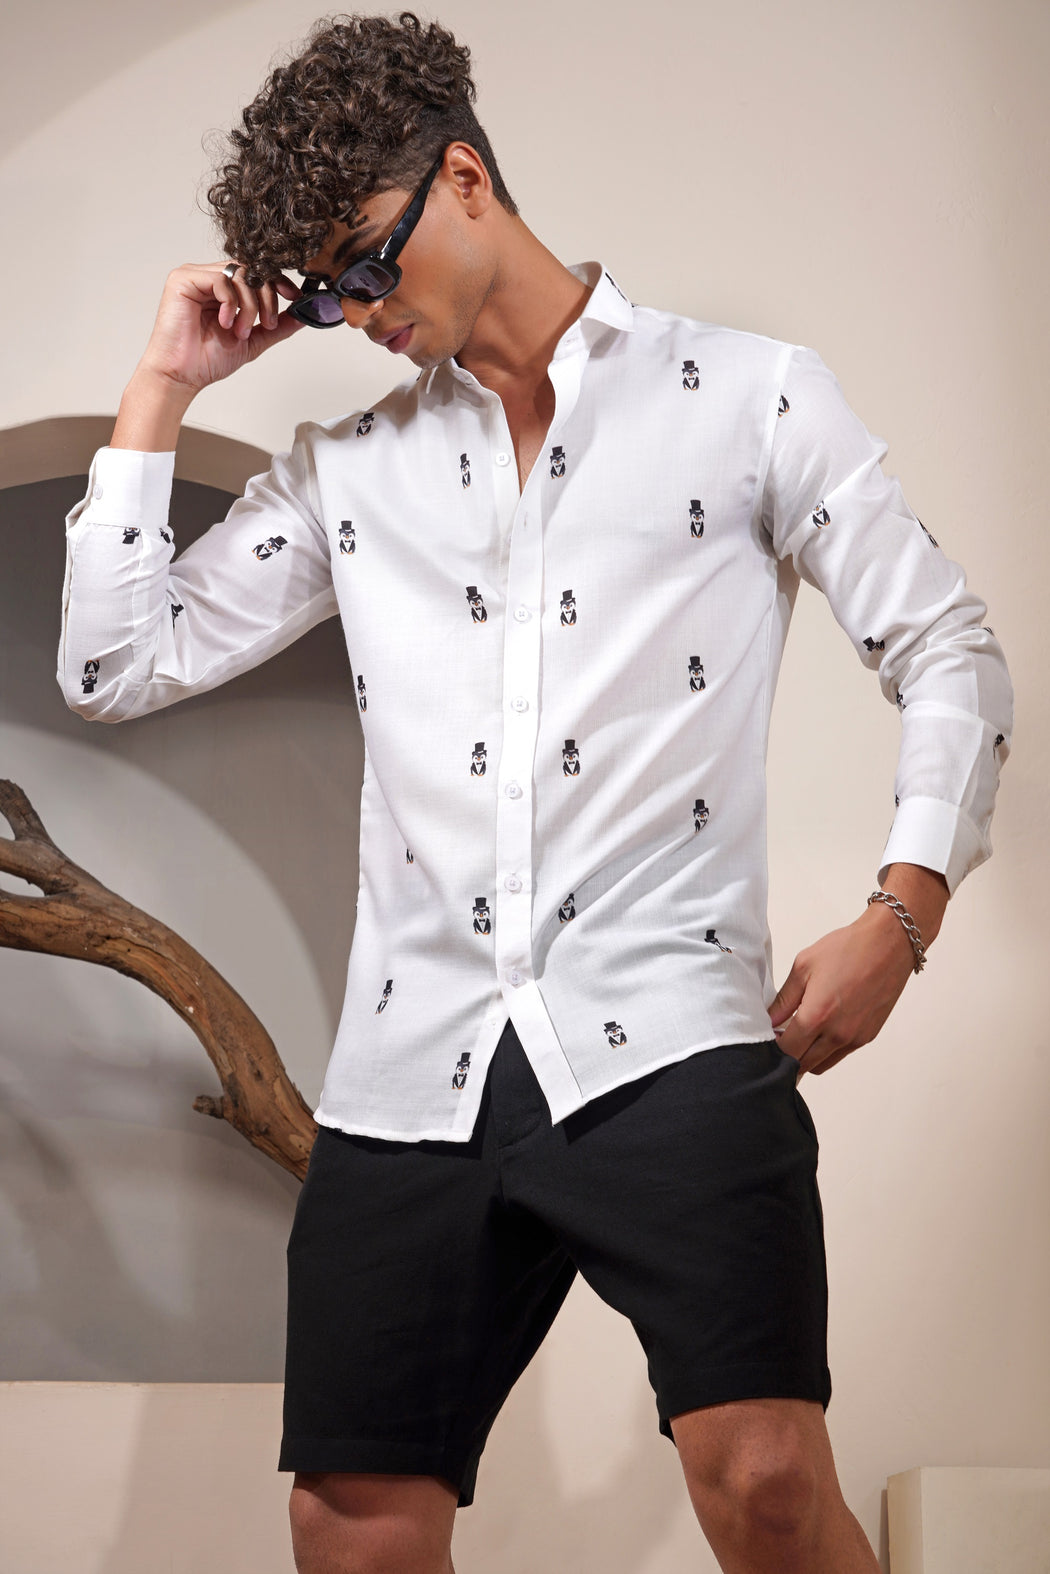 Eleven-brothers, clothes for men, shirt for men, shirt for men, branded denim shirt for men, check shirt for men, formal shirts for men, clothing stores near me, best shirt for men, stylish shirts for men, fashionable shirts for men 